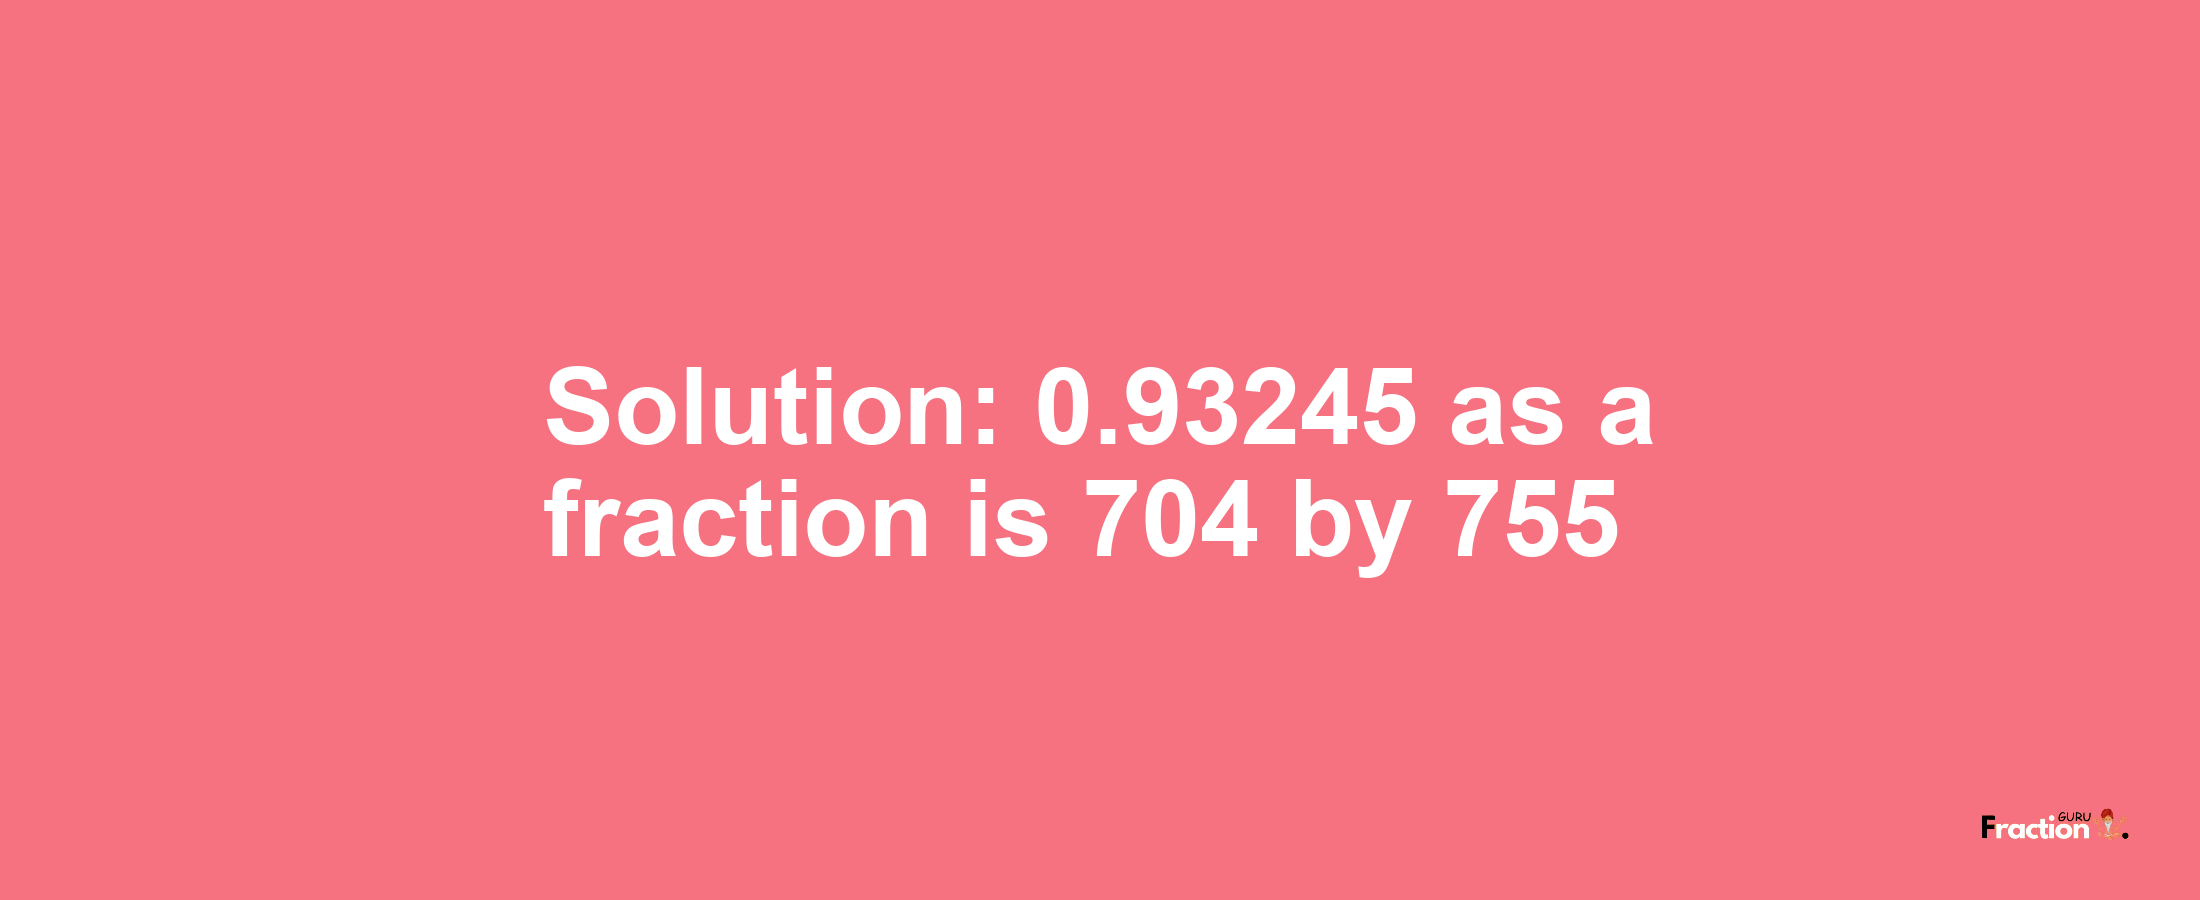 Solution:0.93245 as a fraction is 704/755